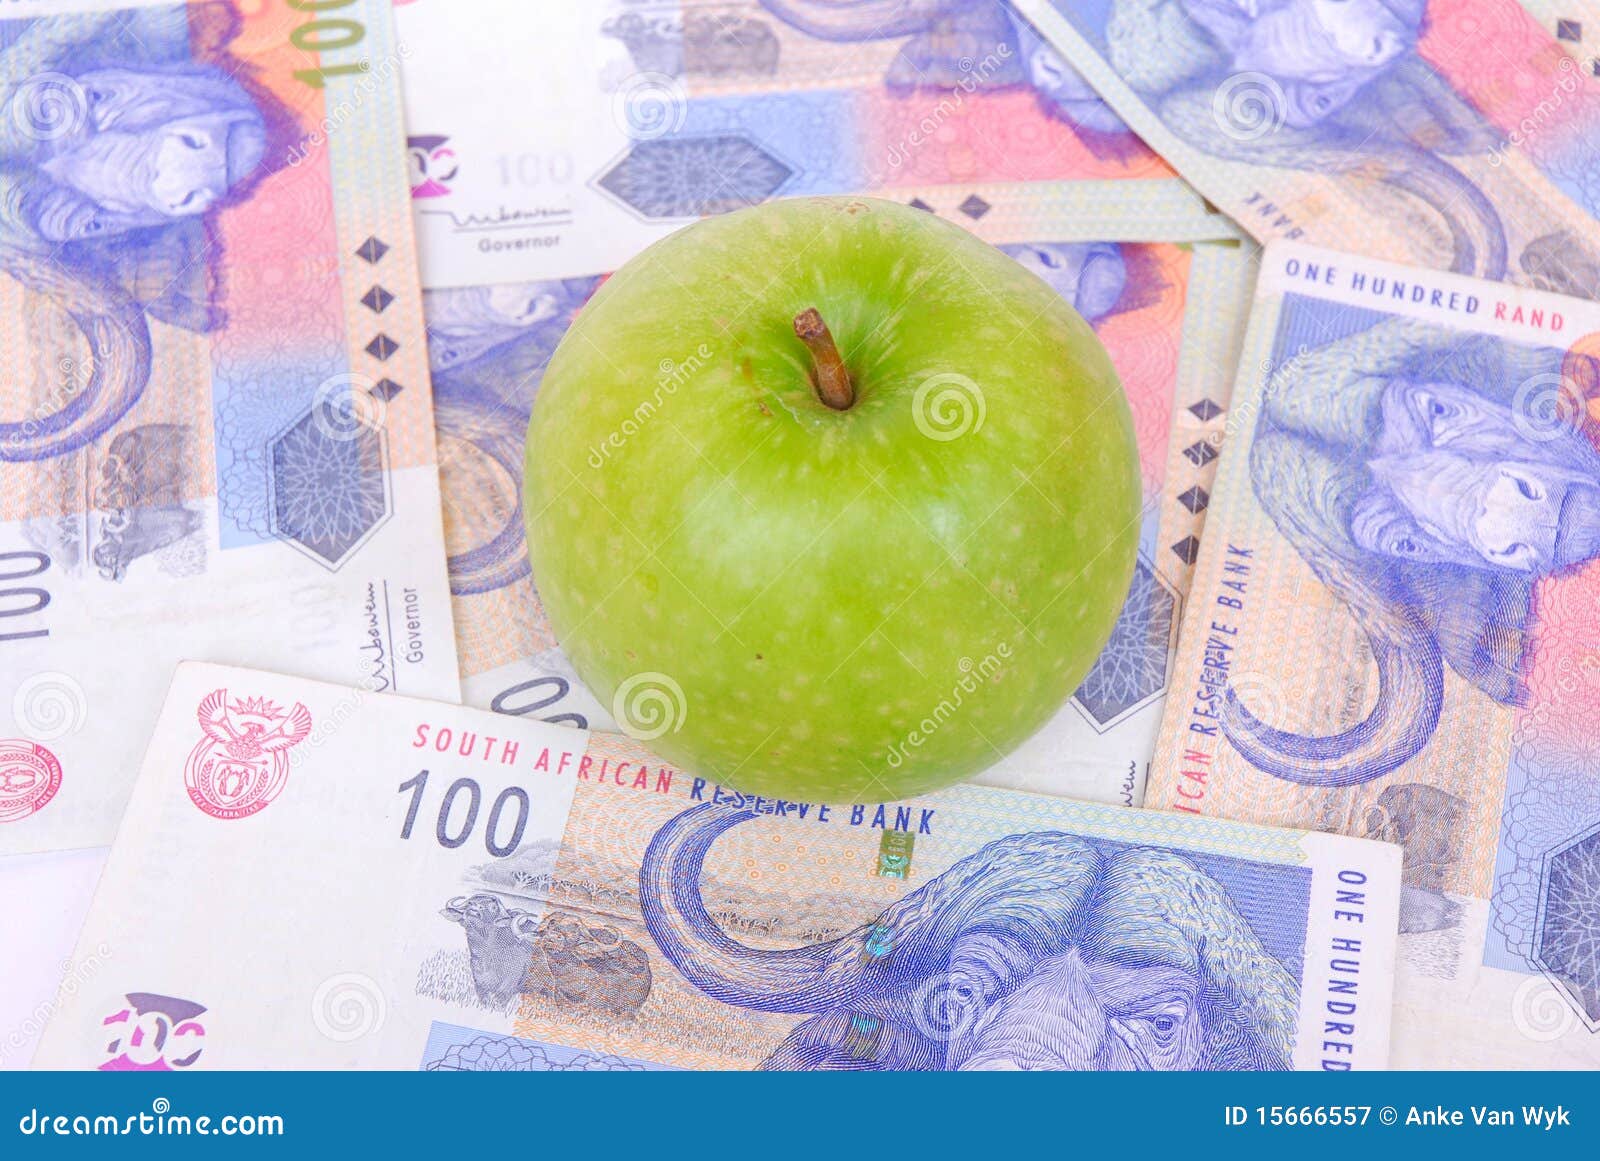 apple on south african rands